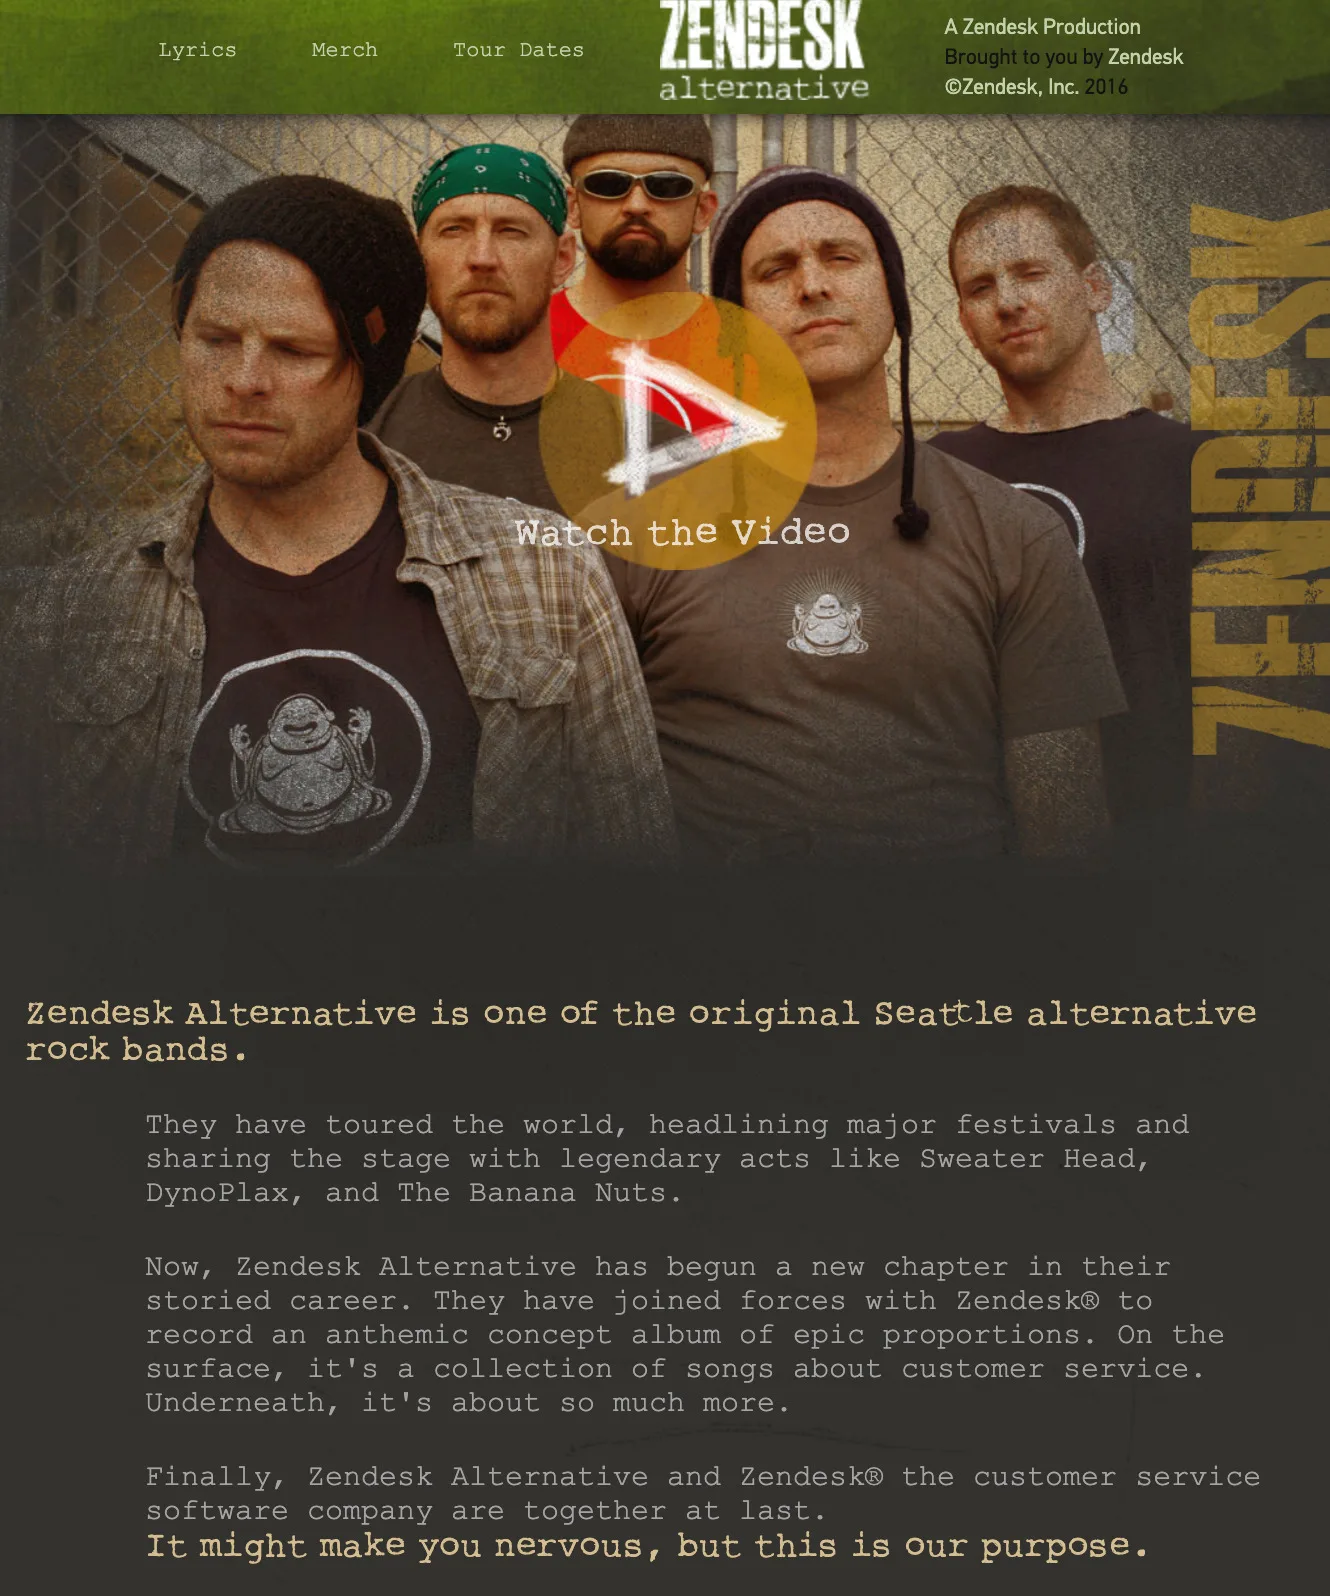 A fake rock band named Zendesk Alternative created by Zendesk to prevent competitors from ranking for its brand name